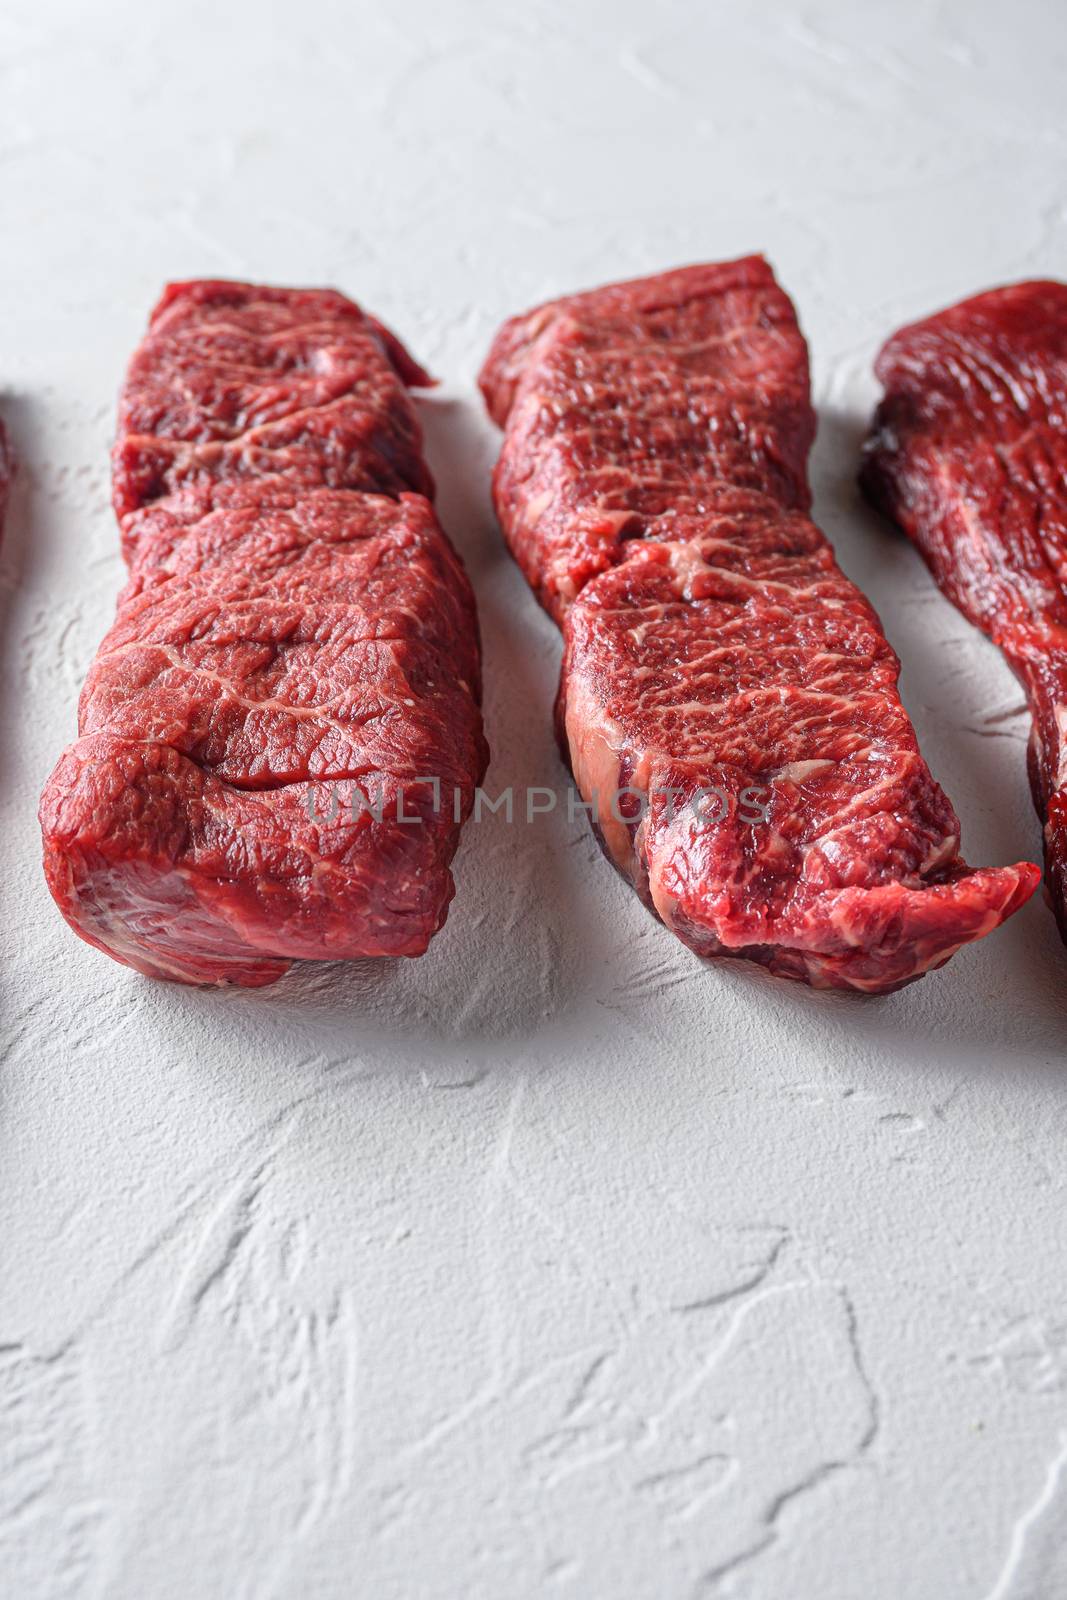 Raw denver steak cut organic meat cut side view close up over white concrete background vertical selective focus by Ilianesolenyi